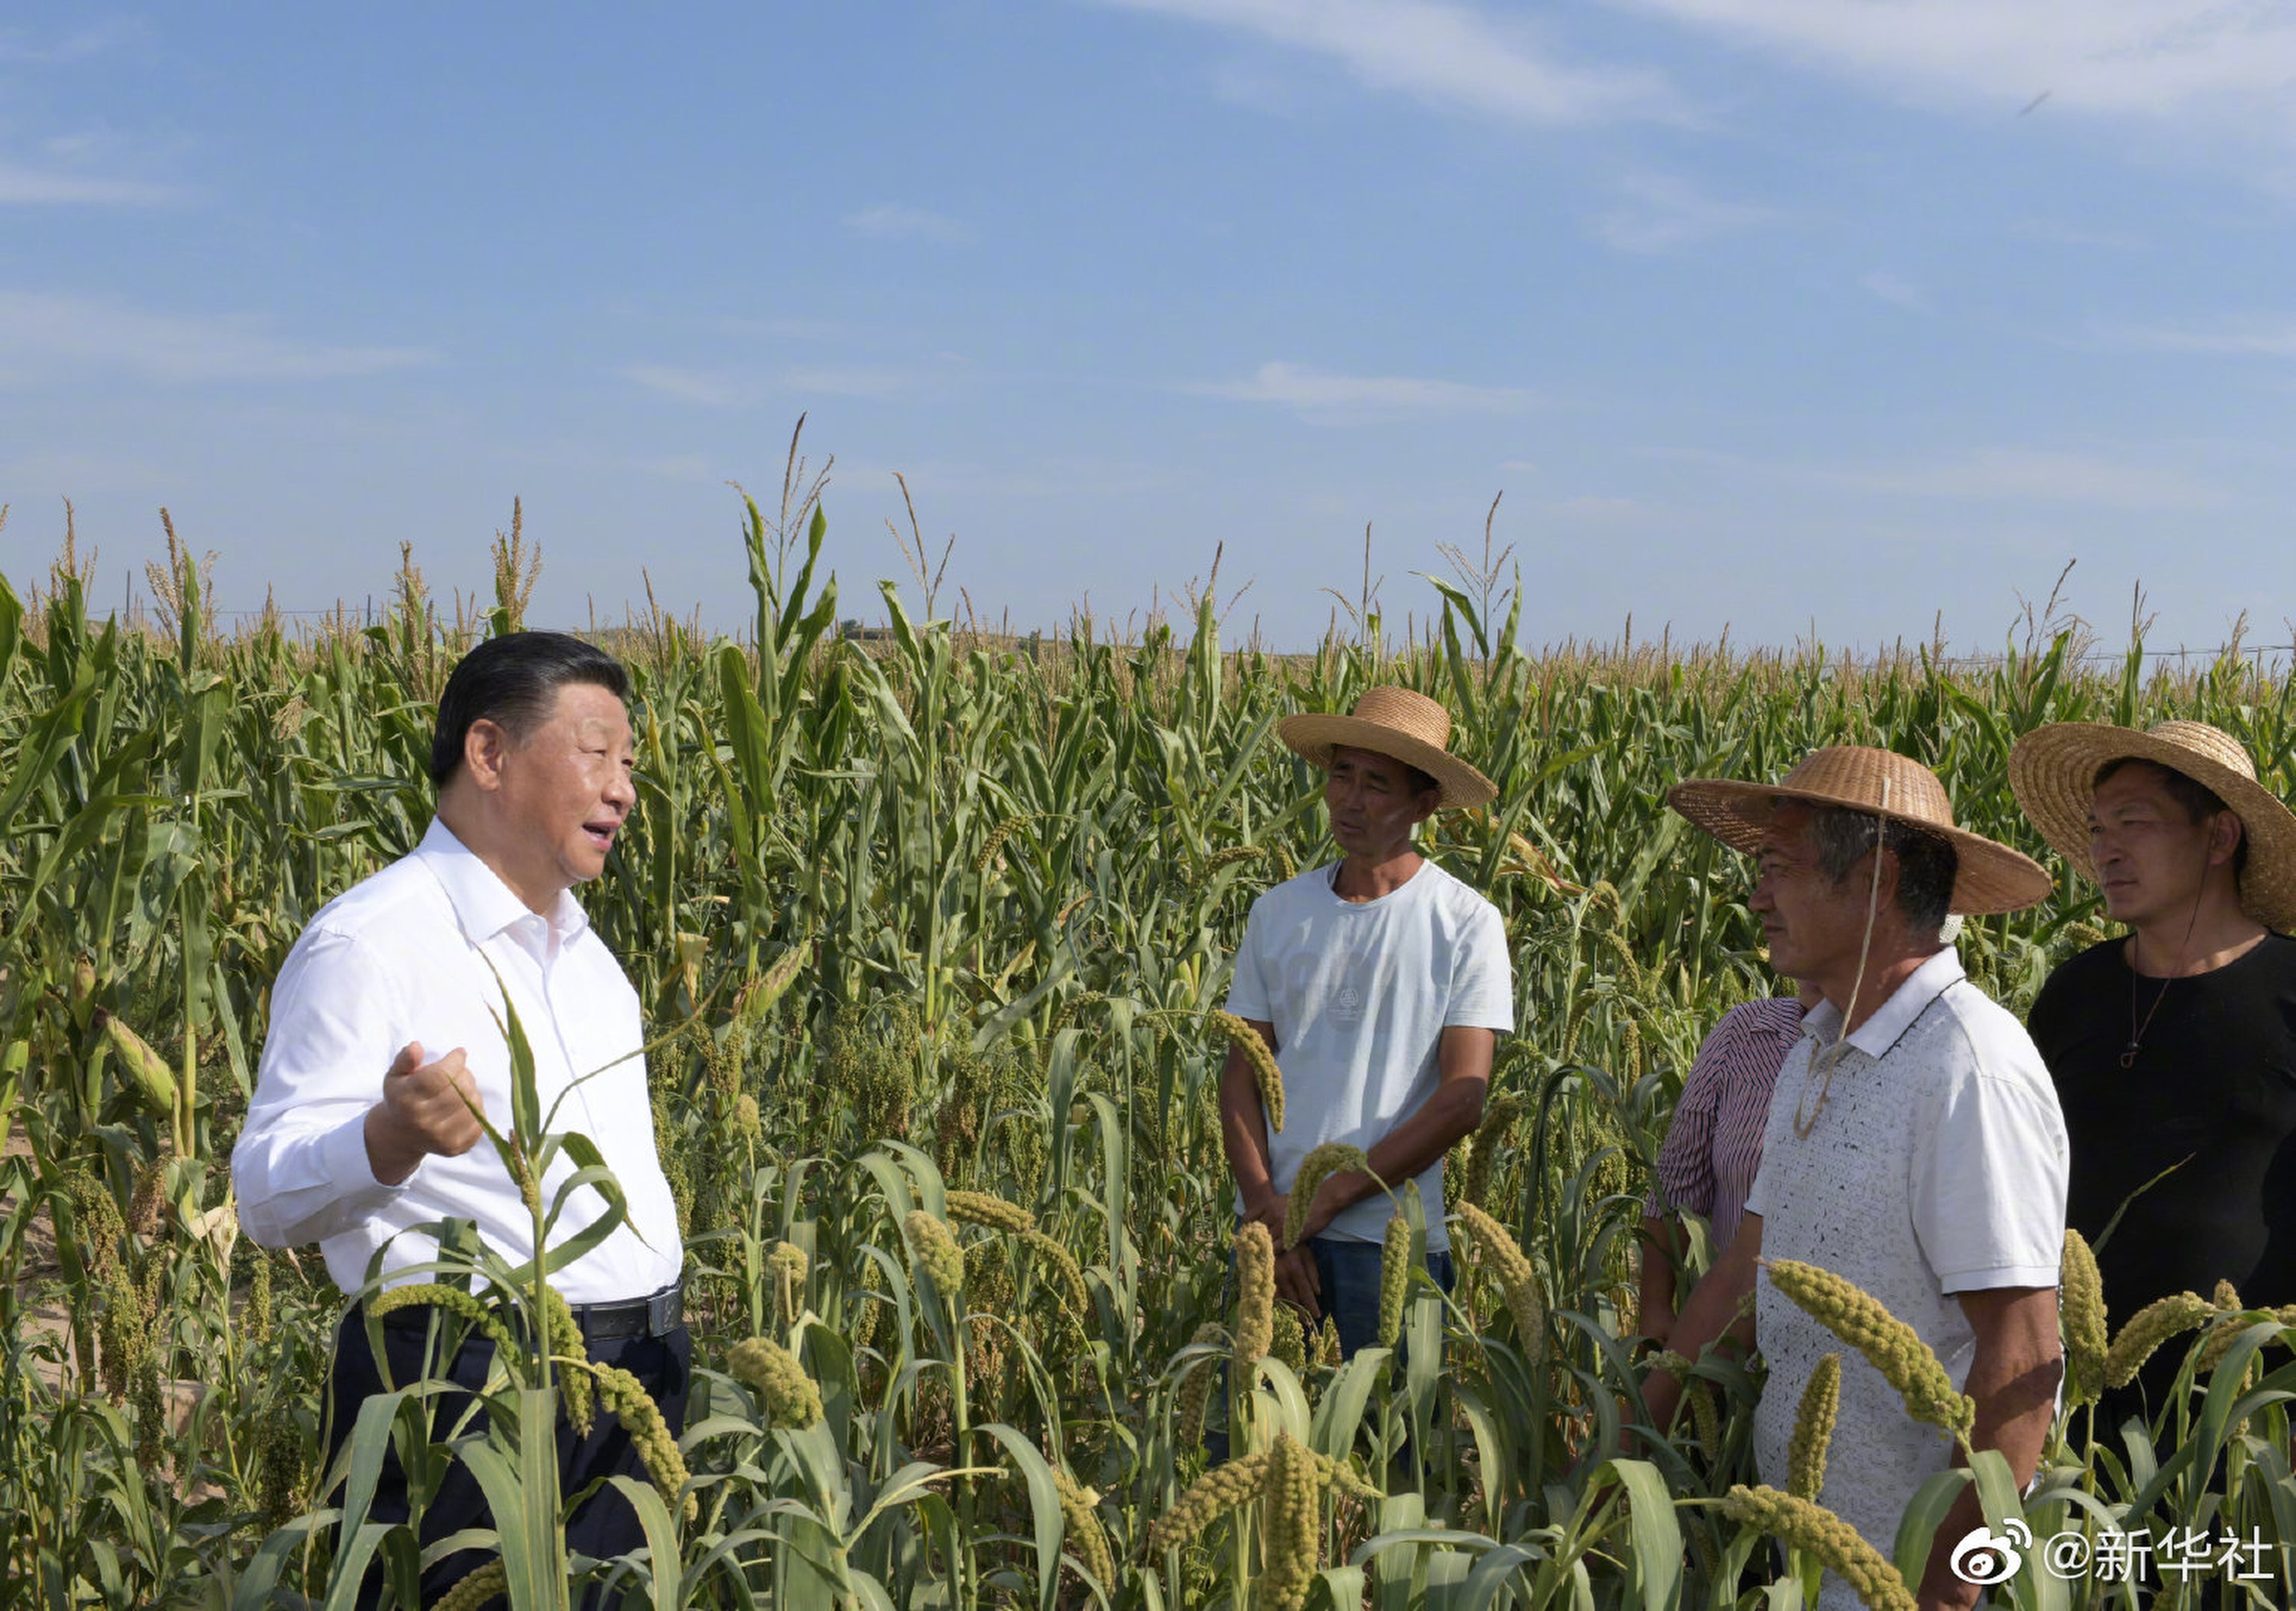 President Xi Jinping inspected land rehabilitation projects during his visit to Shaanxi province and paid tribute to Communist Party pioneers at Yangjiagou Revolutionary Memorial Hall. Photo: Weibo